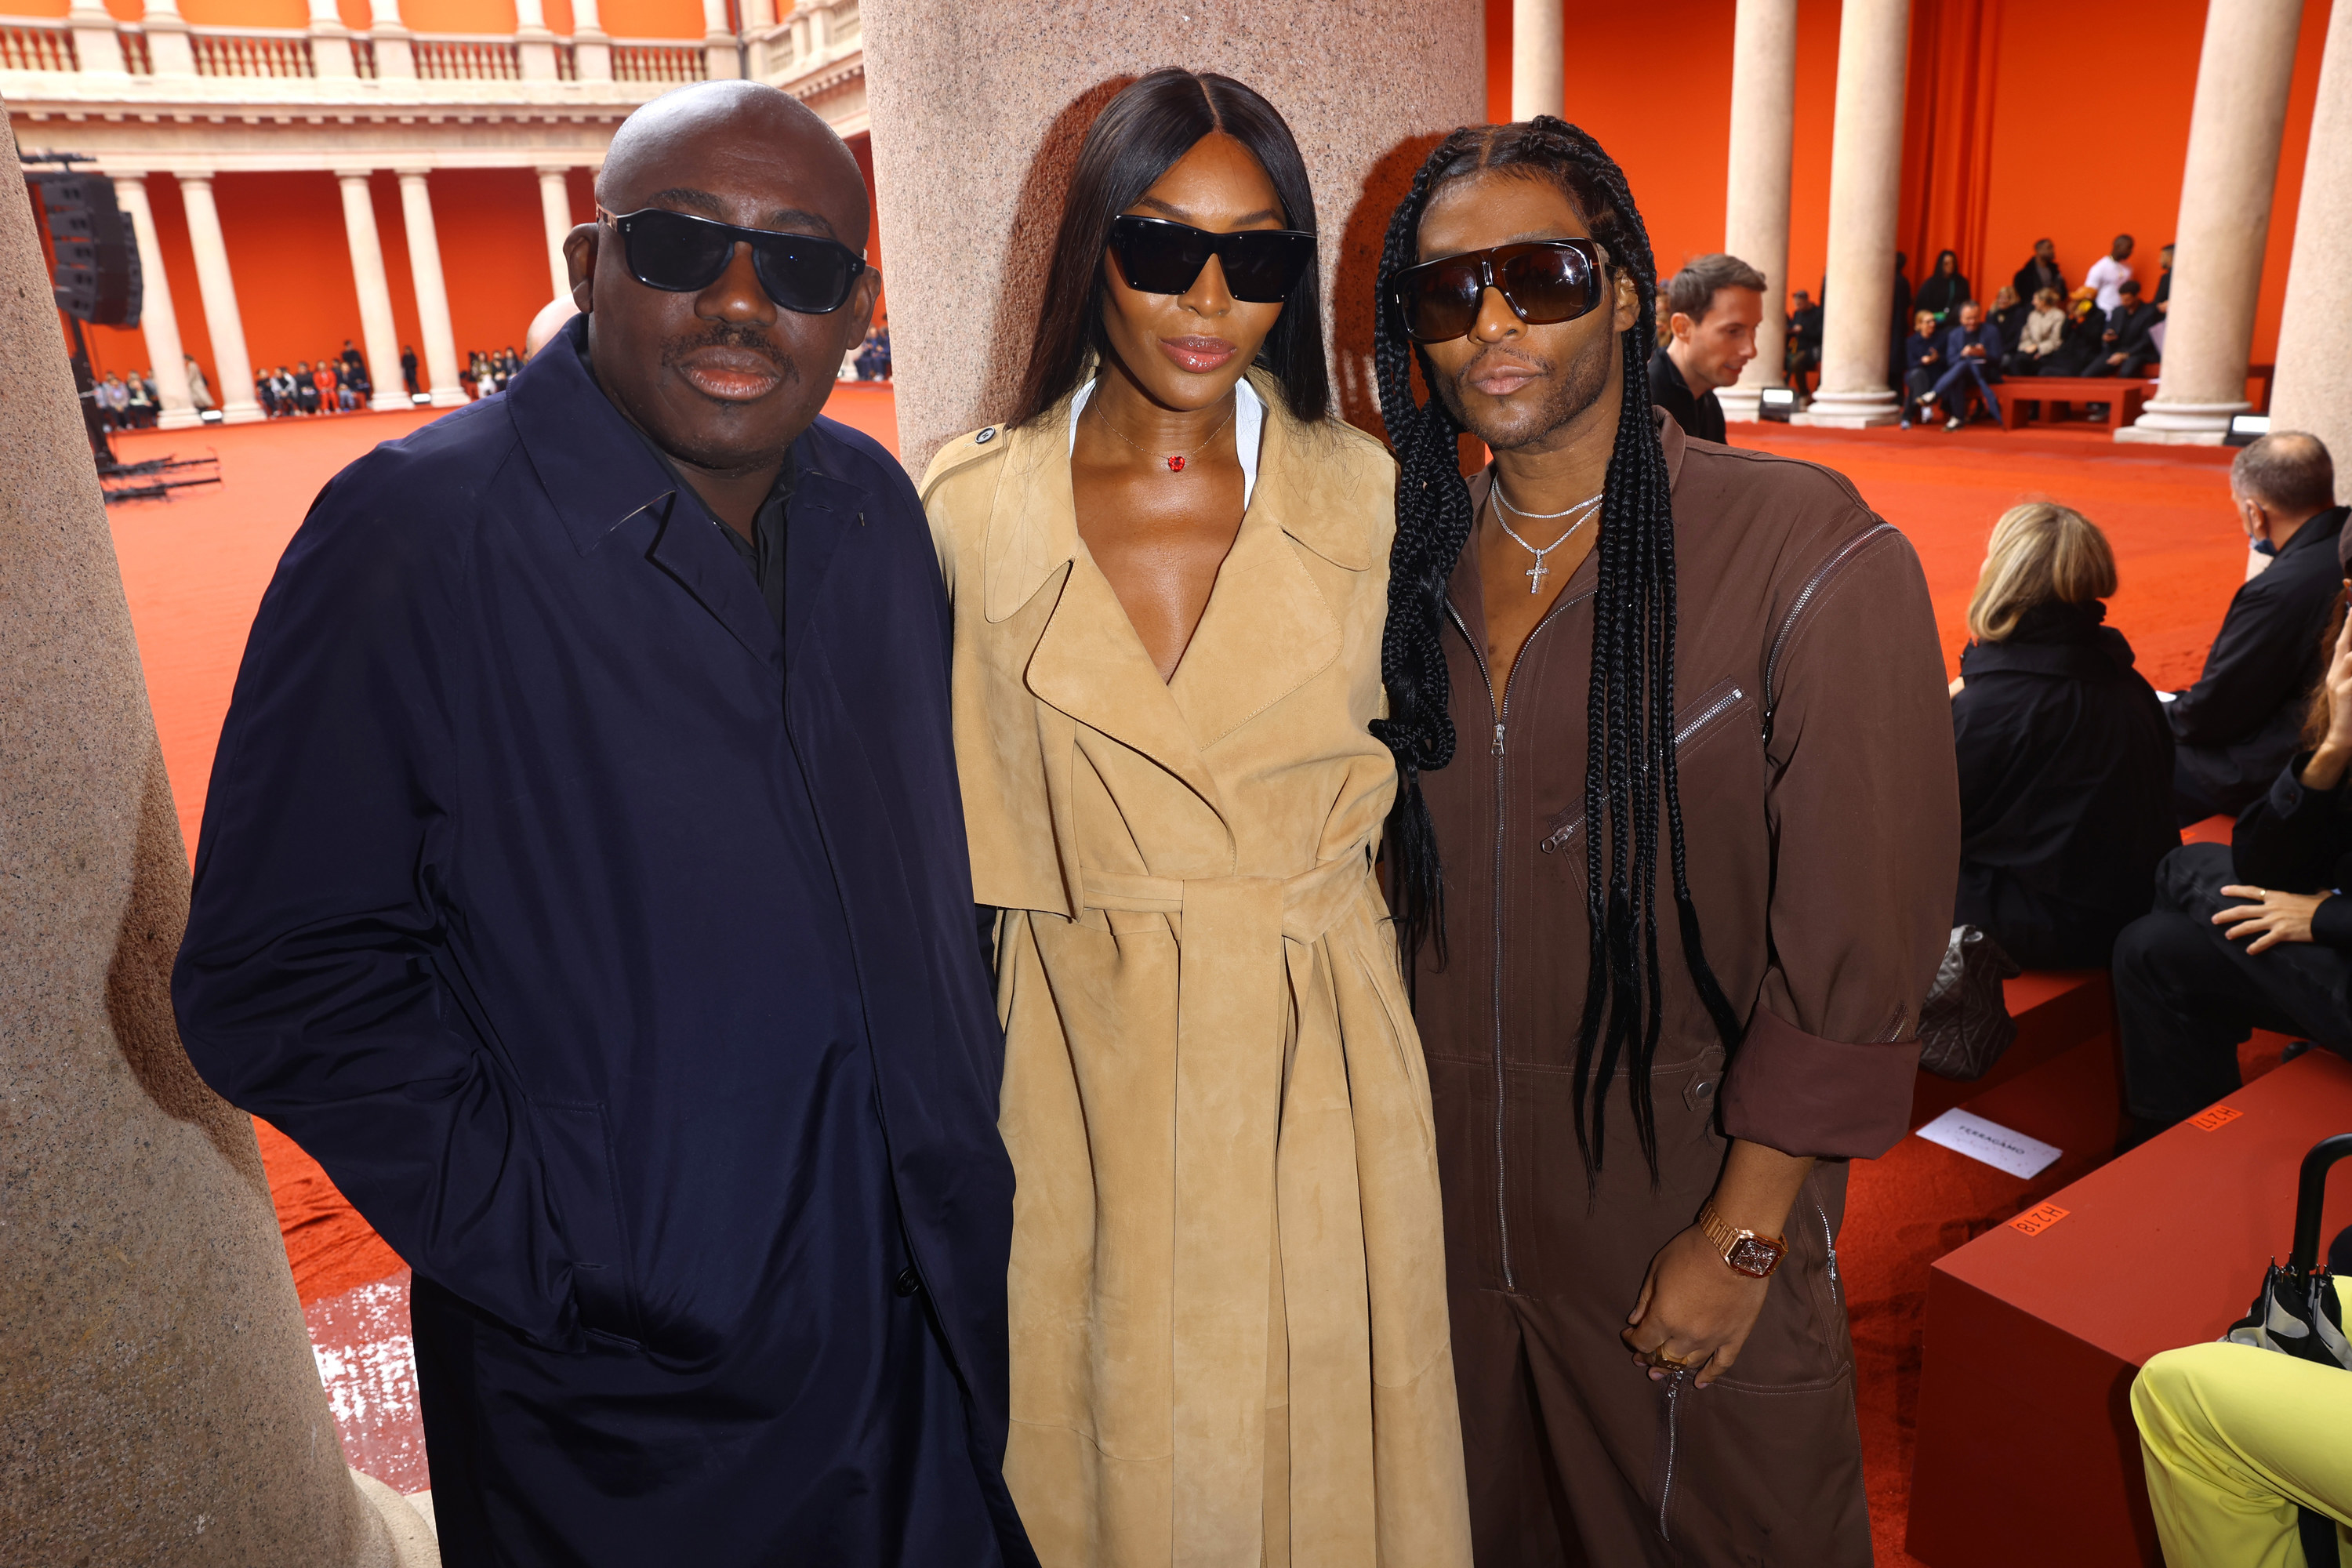 Edward Enninful, Naomi Campbell and Law Roach at a fashion show in Milan, Italy